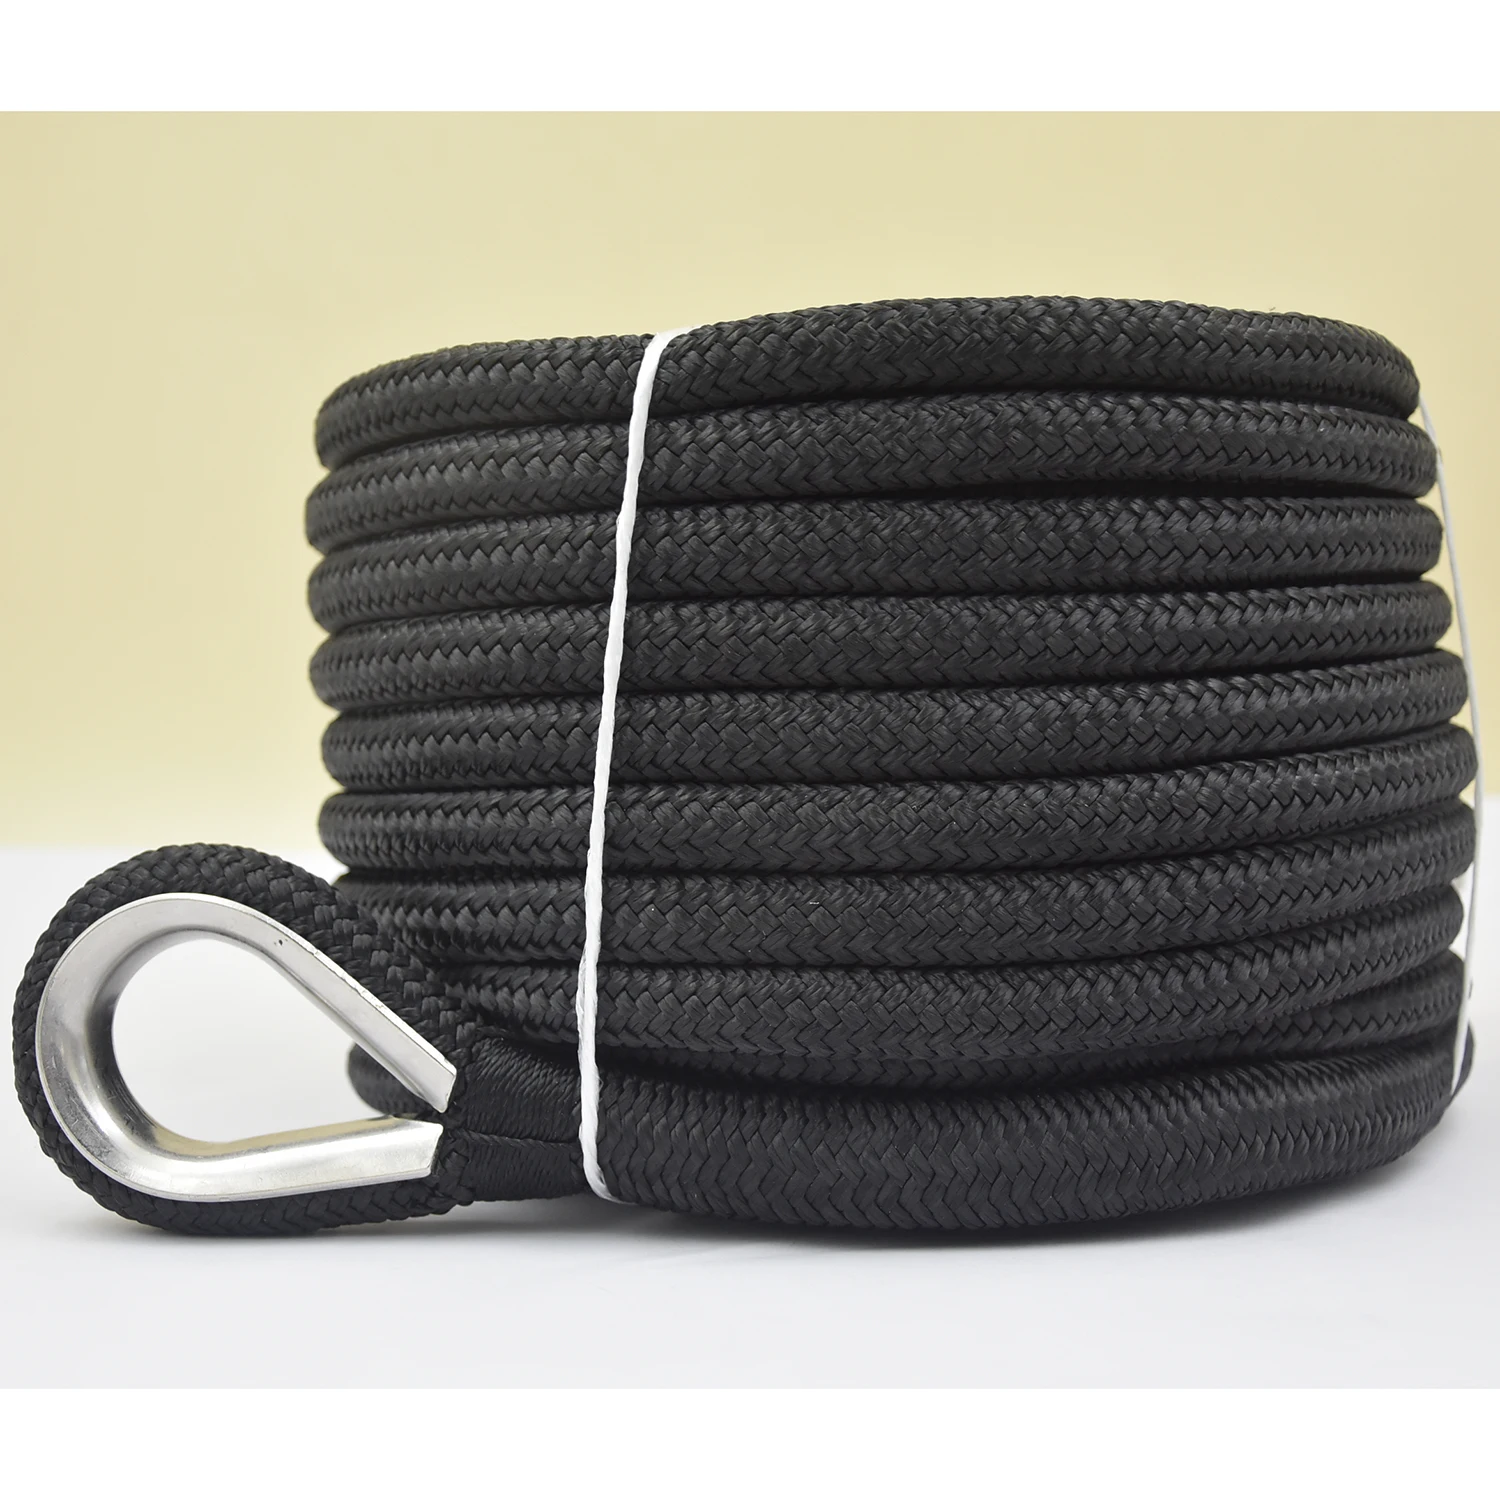 Hot sale customized package and size nylon/ polyester/ pp braided/ twisted gym battle rope exercise rope for indoor/ outdoor